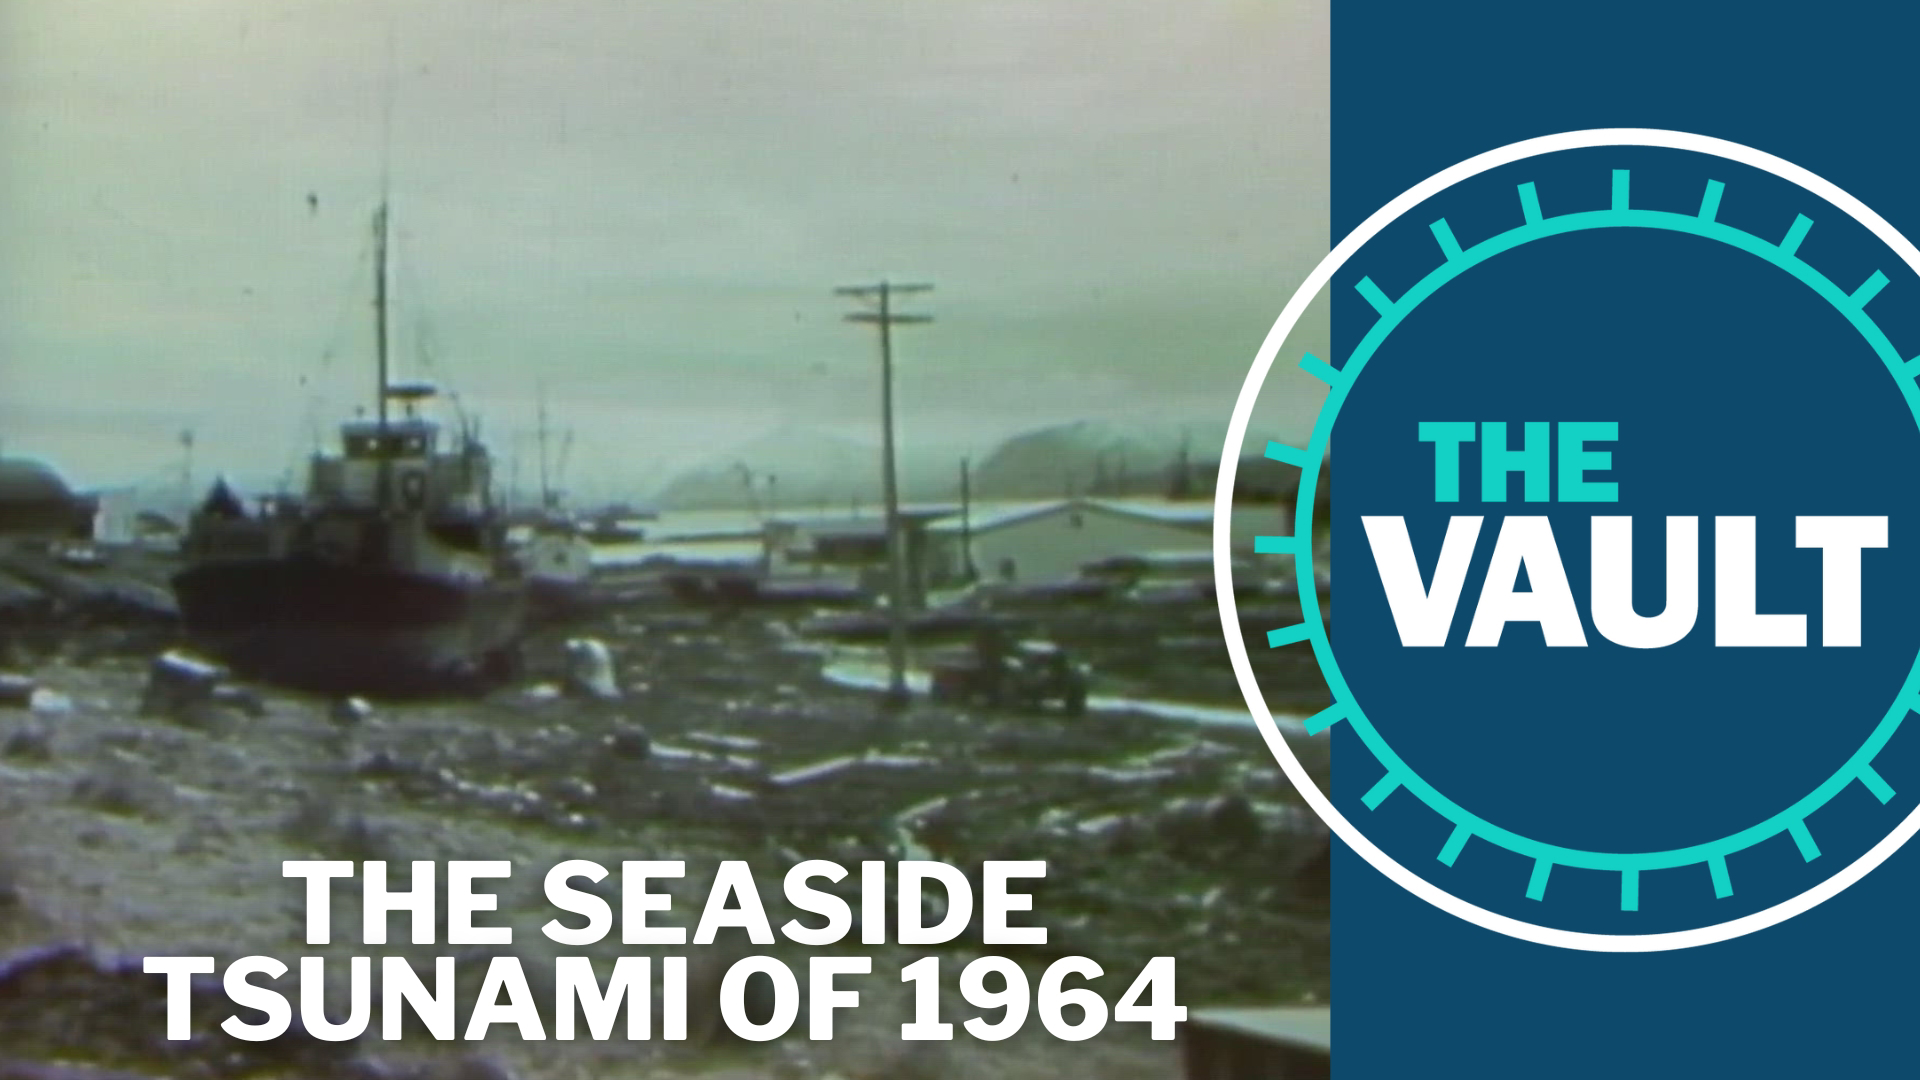 59 years ago today, a large earthquake struck along the southern coast of Alaska. The resulting tsunami hit the Oregon city of Seaside especially hard.